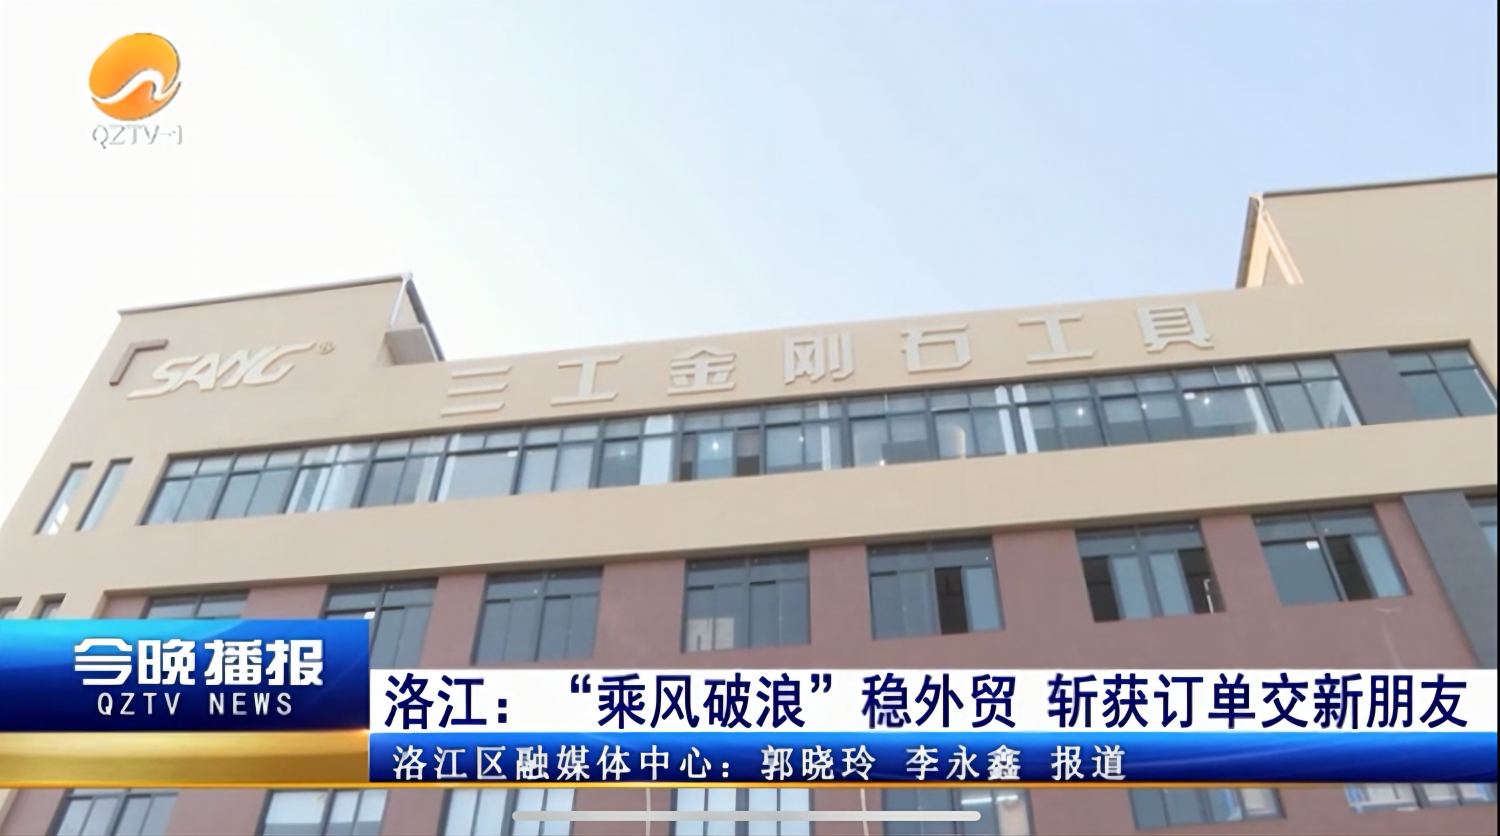 Quanzhou Sang Diamond Tools Was Reported By The People's Daily and QZTV